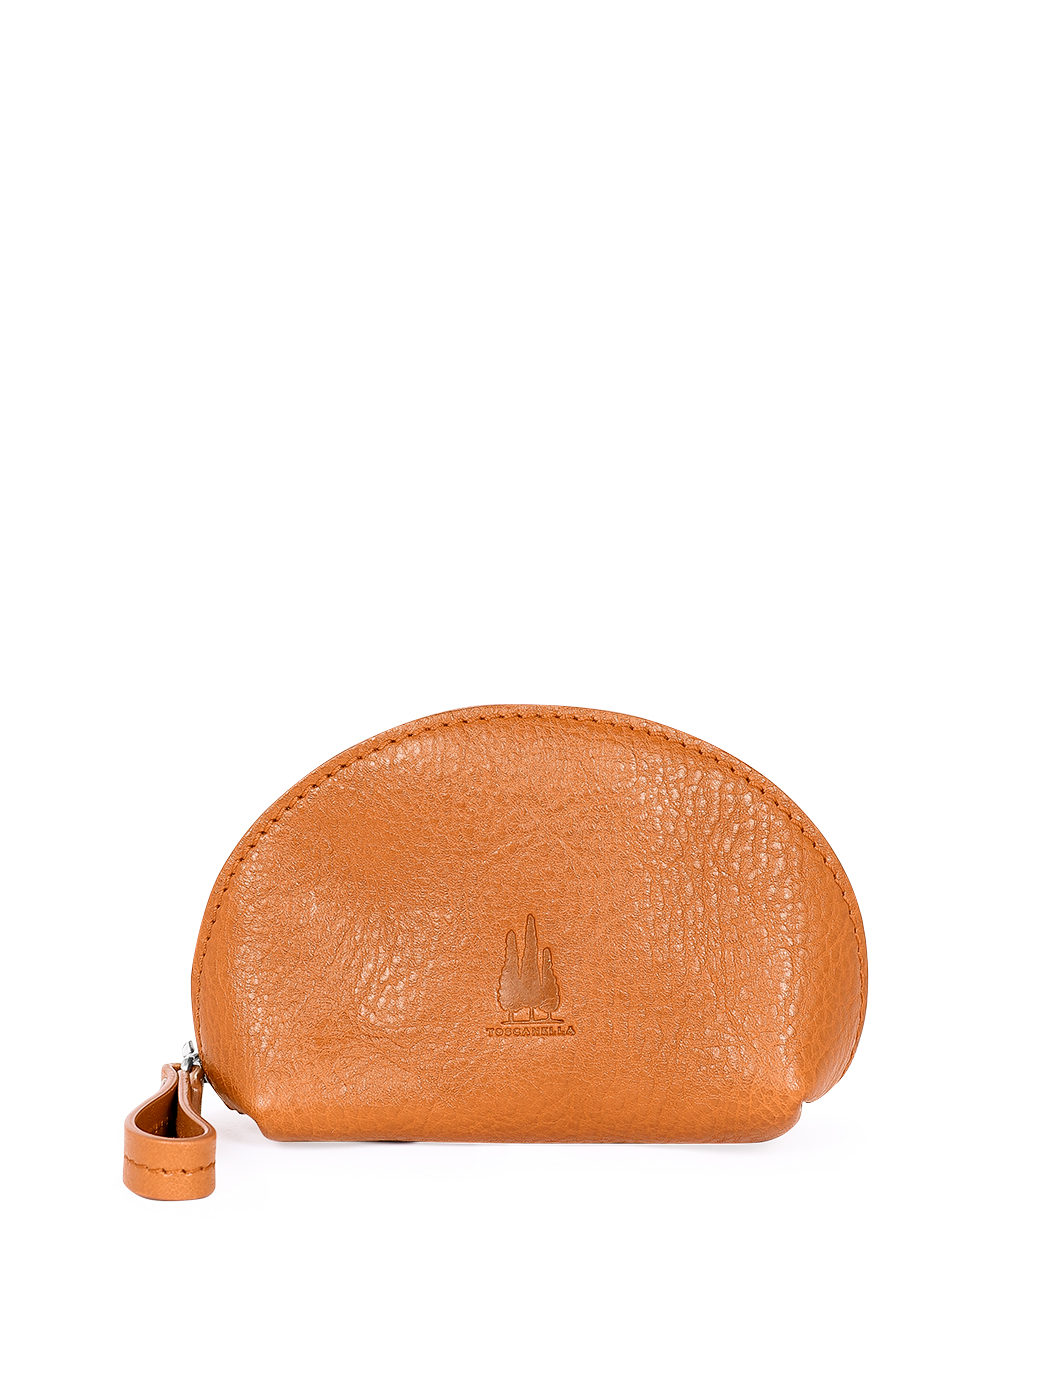 Women's Medium Clamshell Pouch in Leather Tobacco